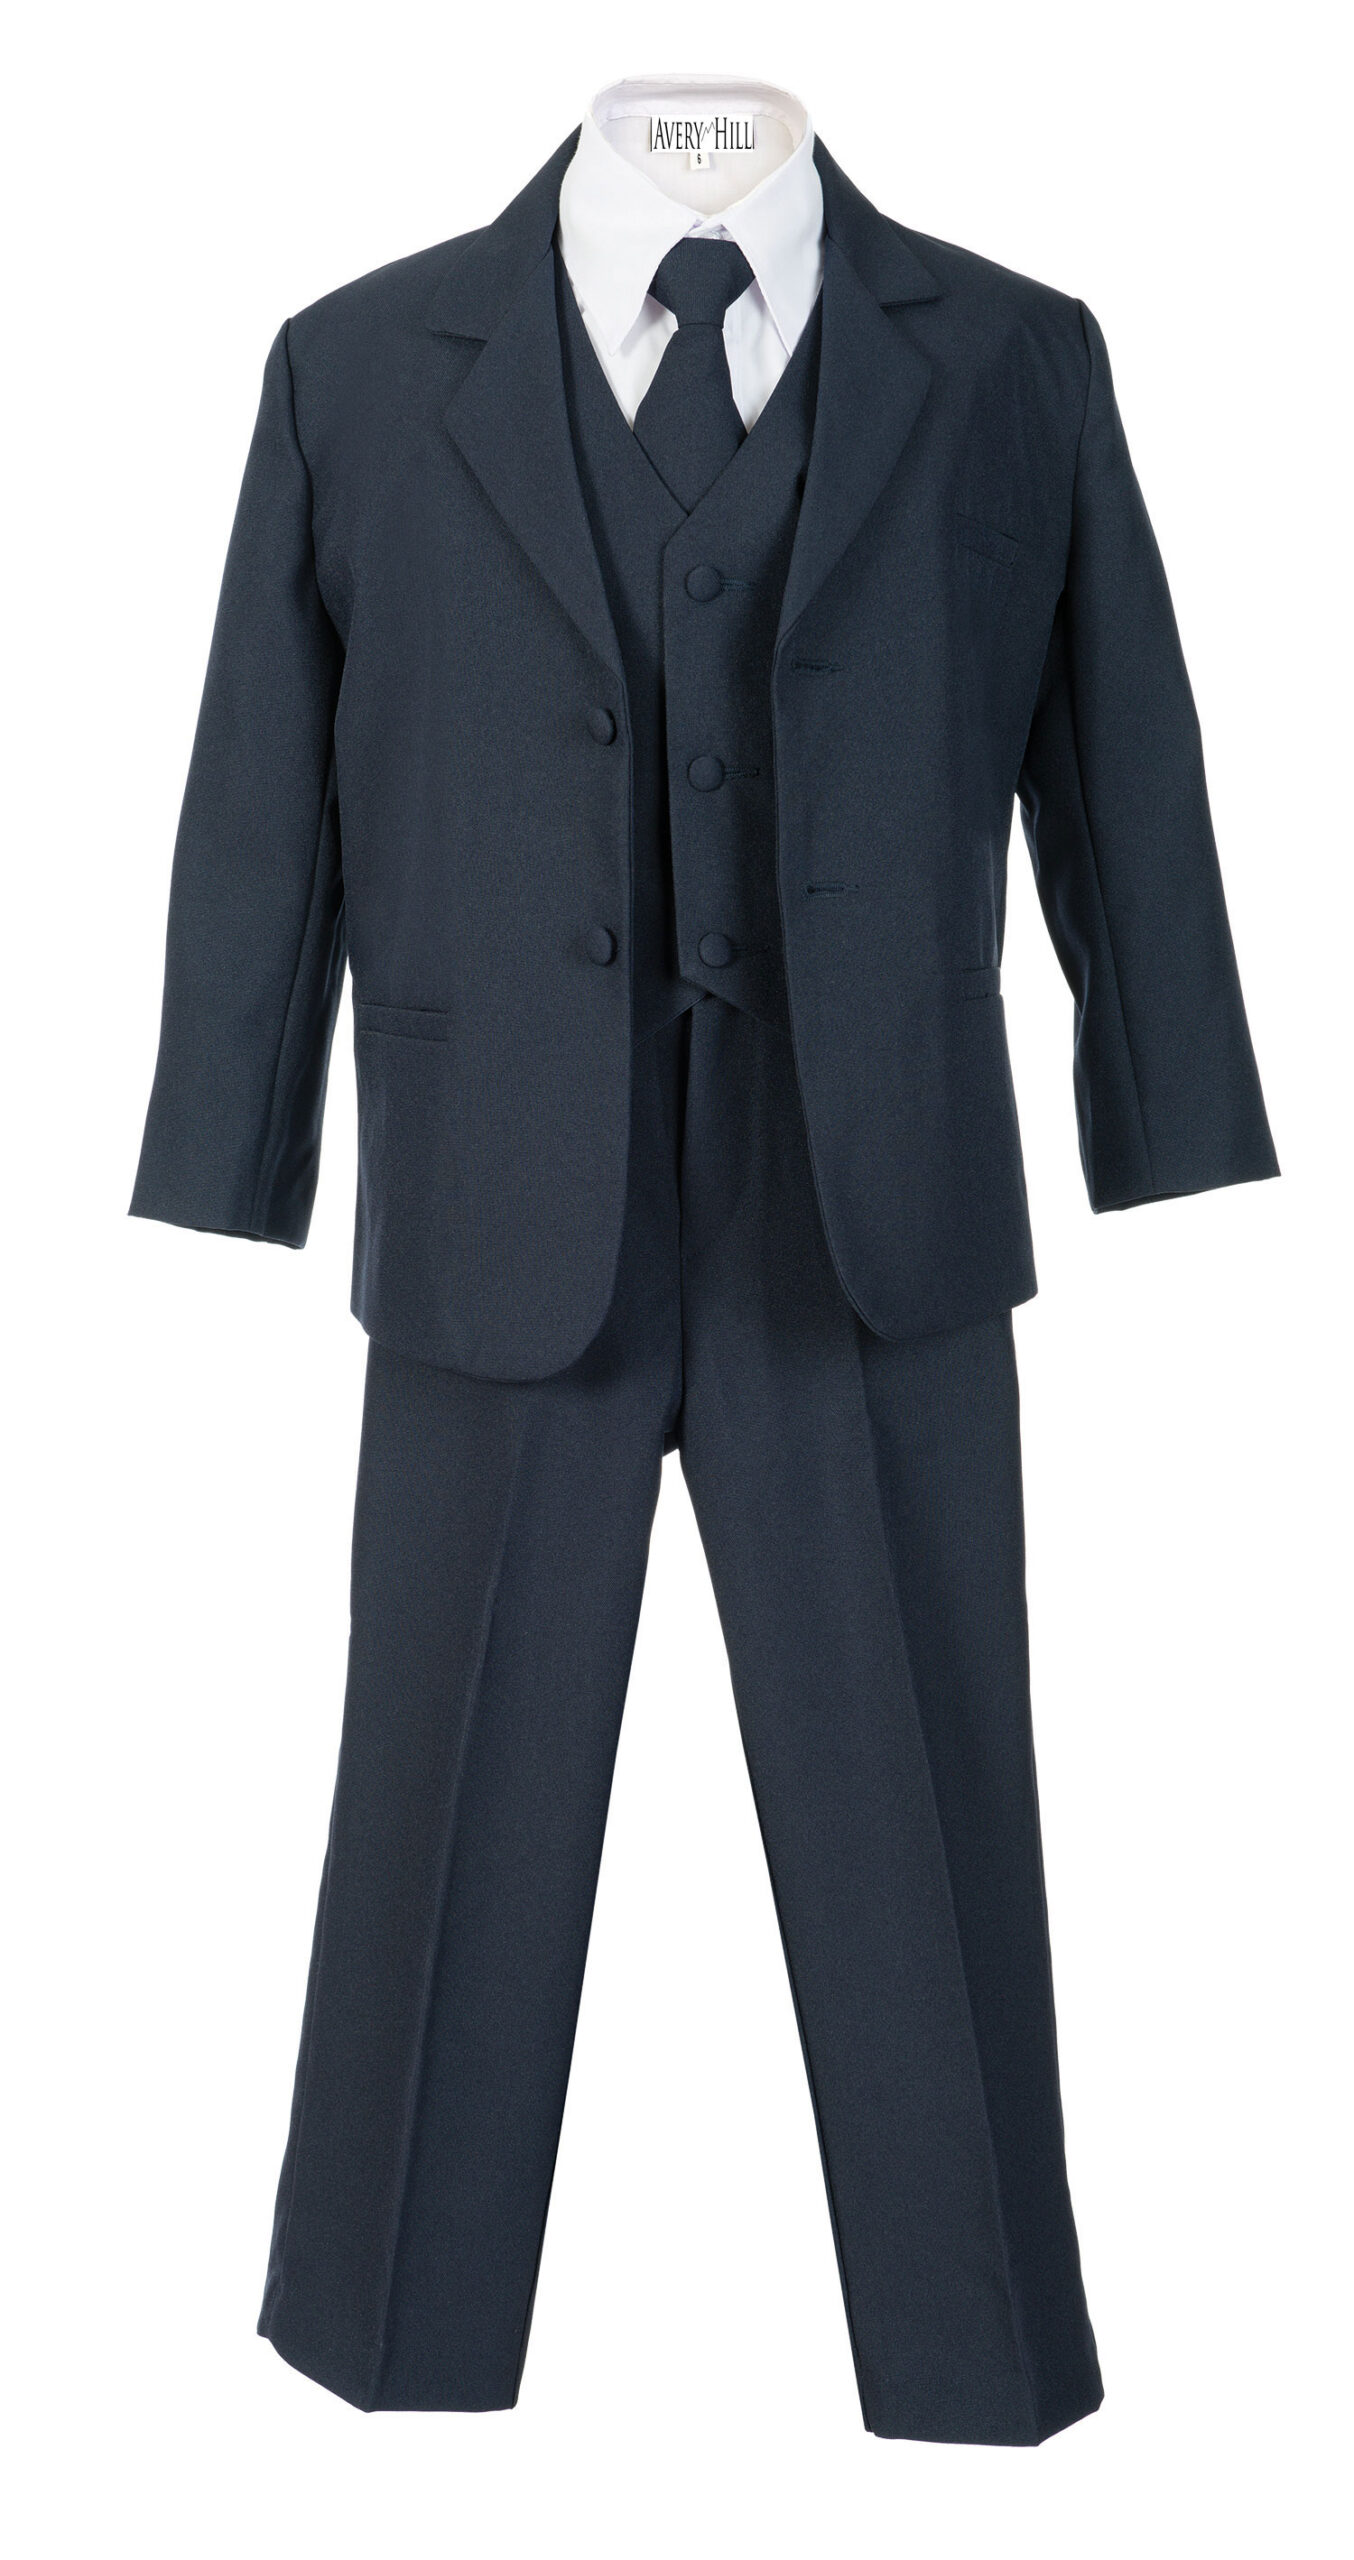 Avery Hill Boys Formal 5 Piece Suit with Shirt and Vest Navy - 4T